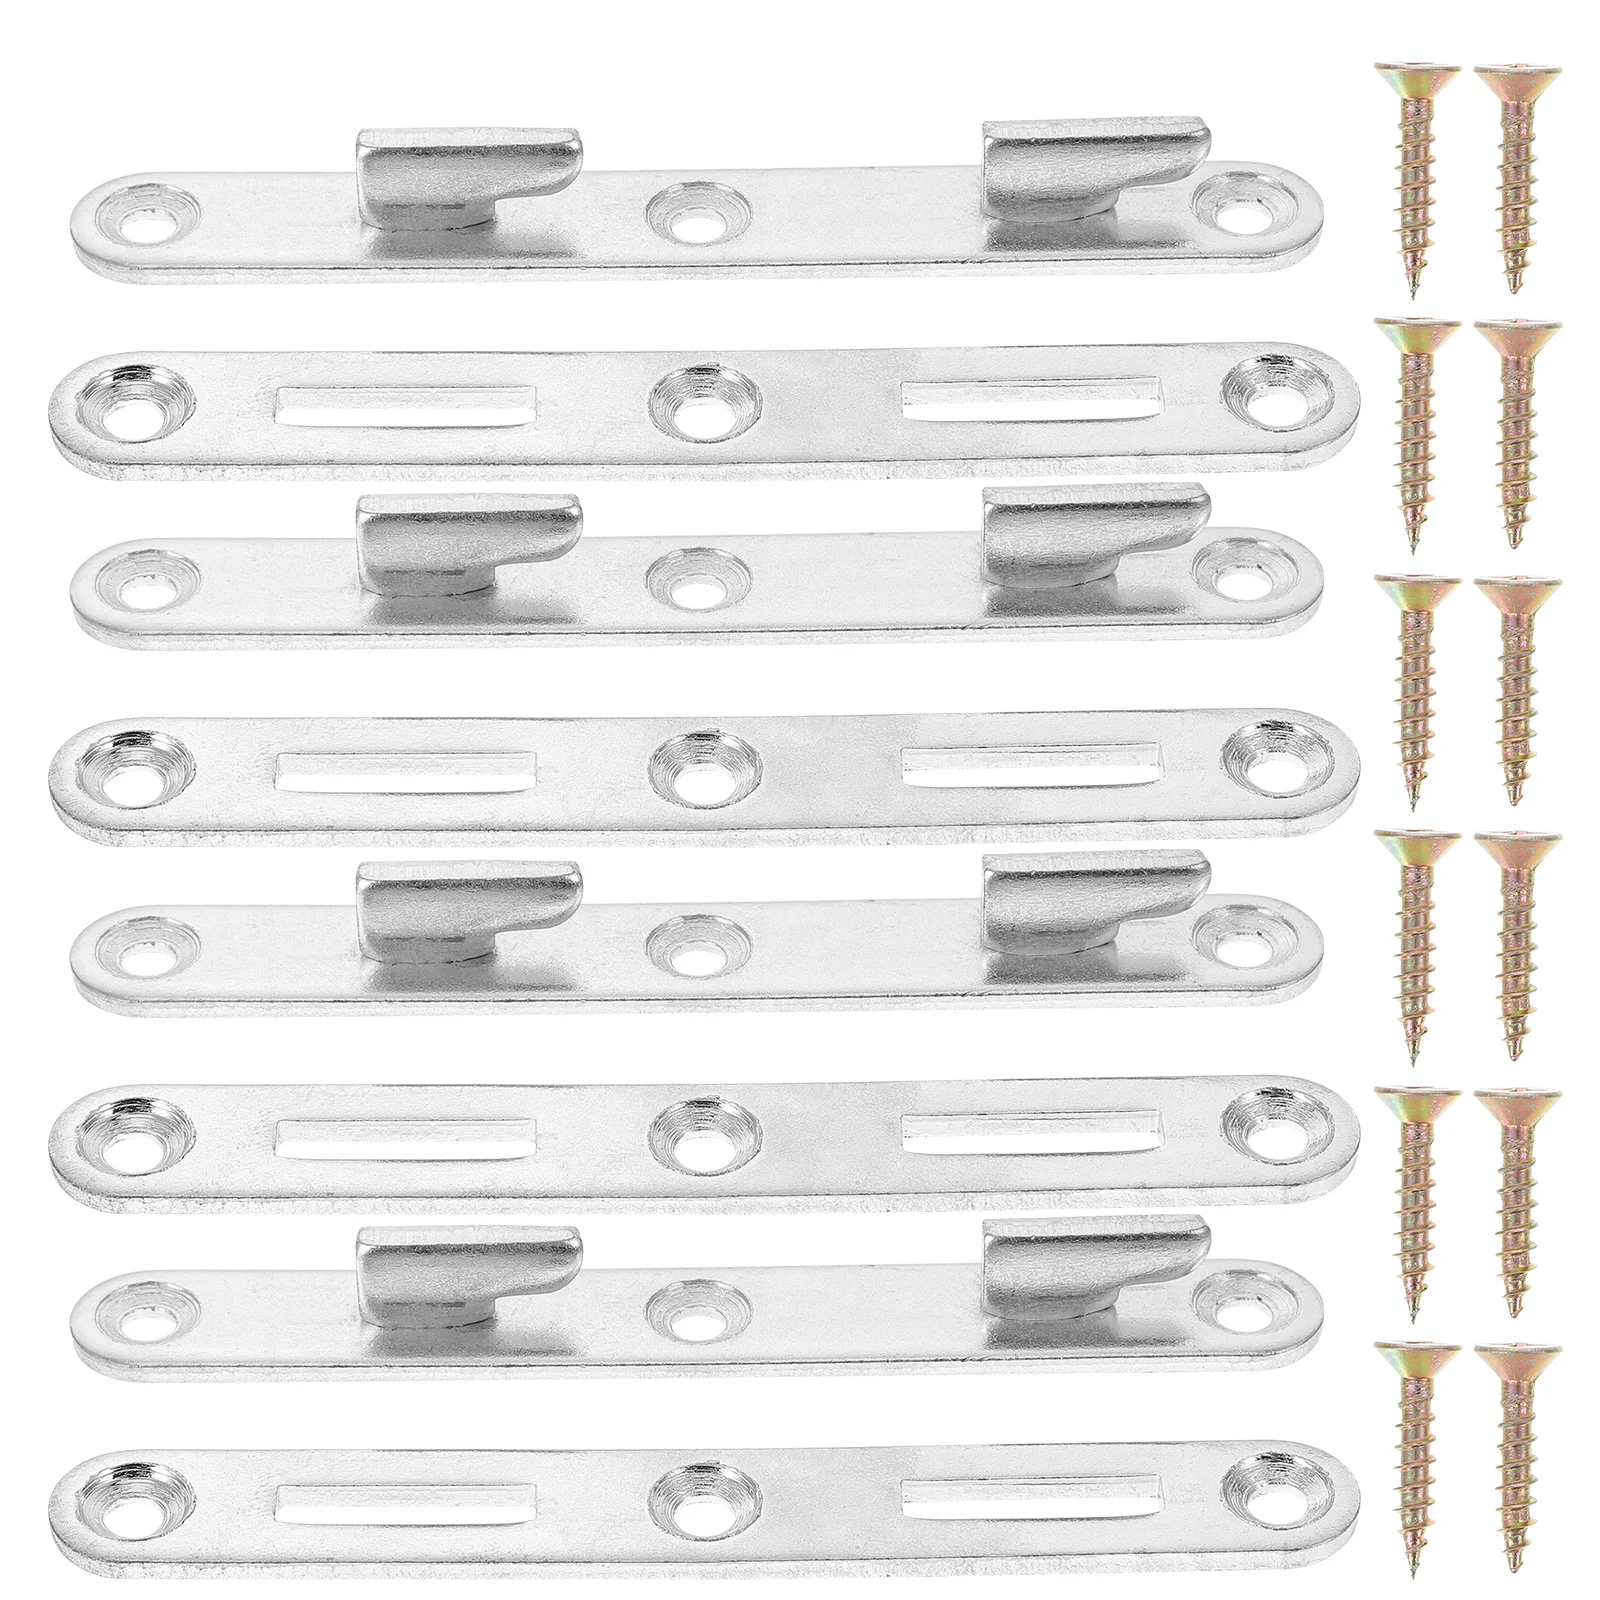 

4 Sets Bed Rail Fasteners Silverdene Furniture Hardwares Connecting Fittings Wall Cabinet Silverts Hook Iron Brackets for